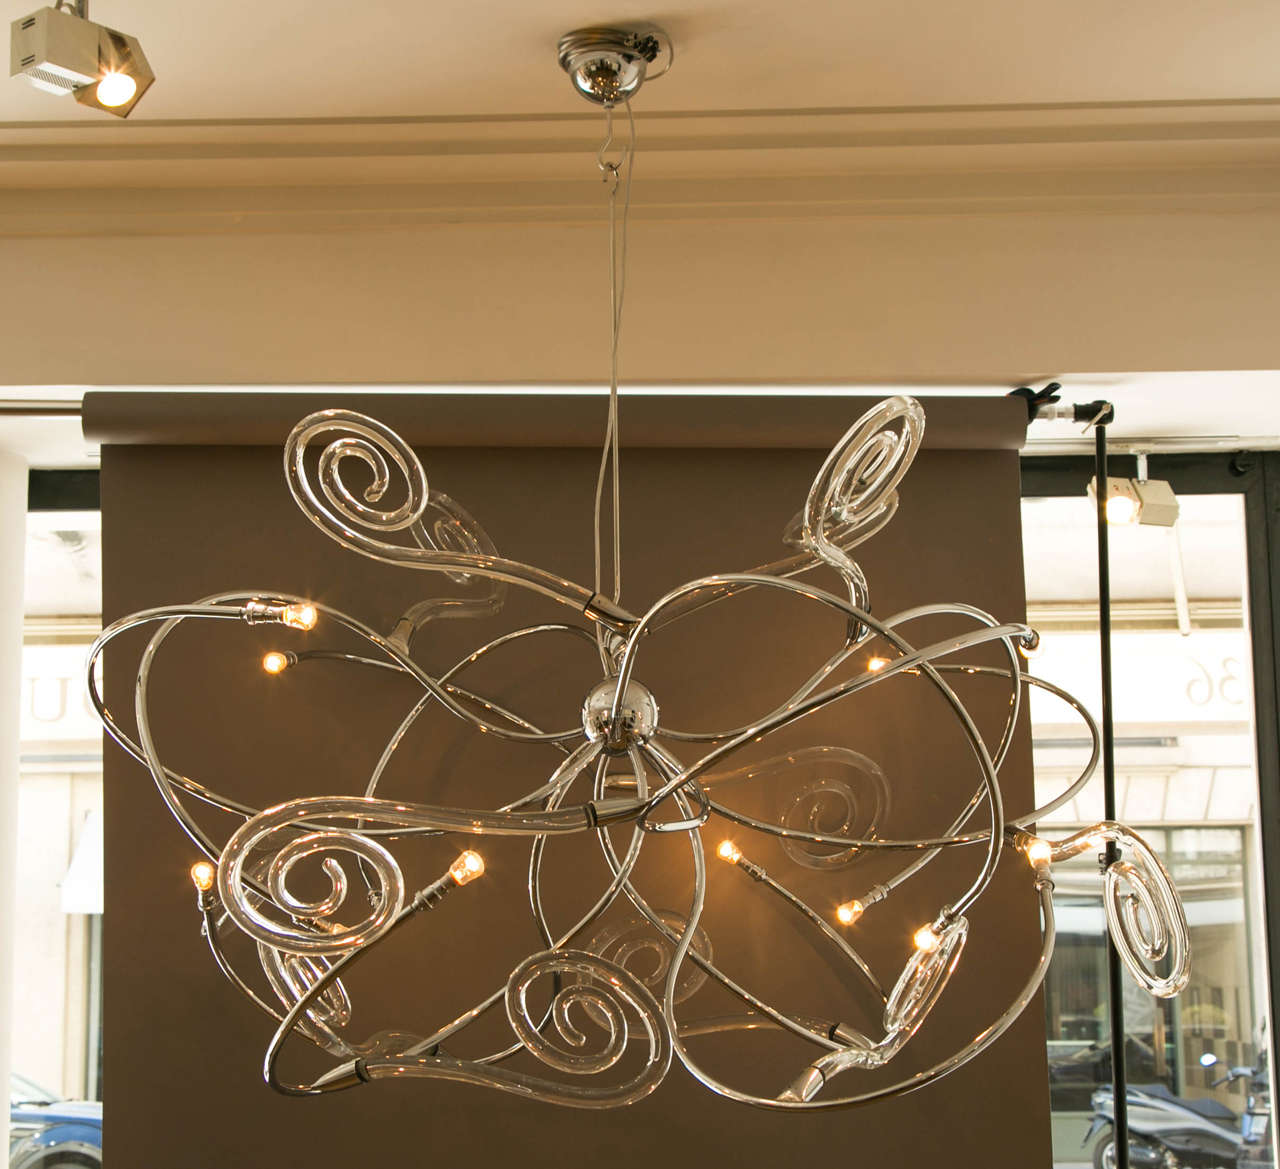 Large chromed steel and Murano glass chandelier called Polvo, 2012, by Maroeska Metz
Refined glass volutes, twelve lights.
Limited edition on 20.
It also exists with blackened steel.